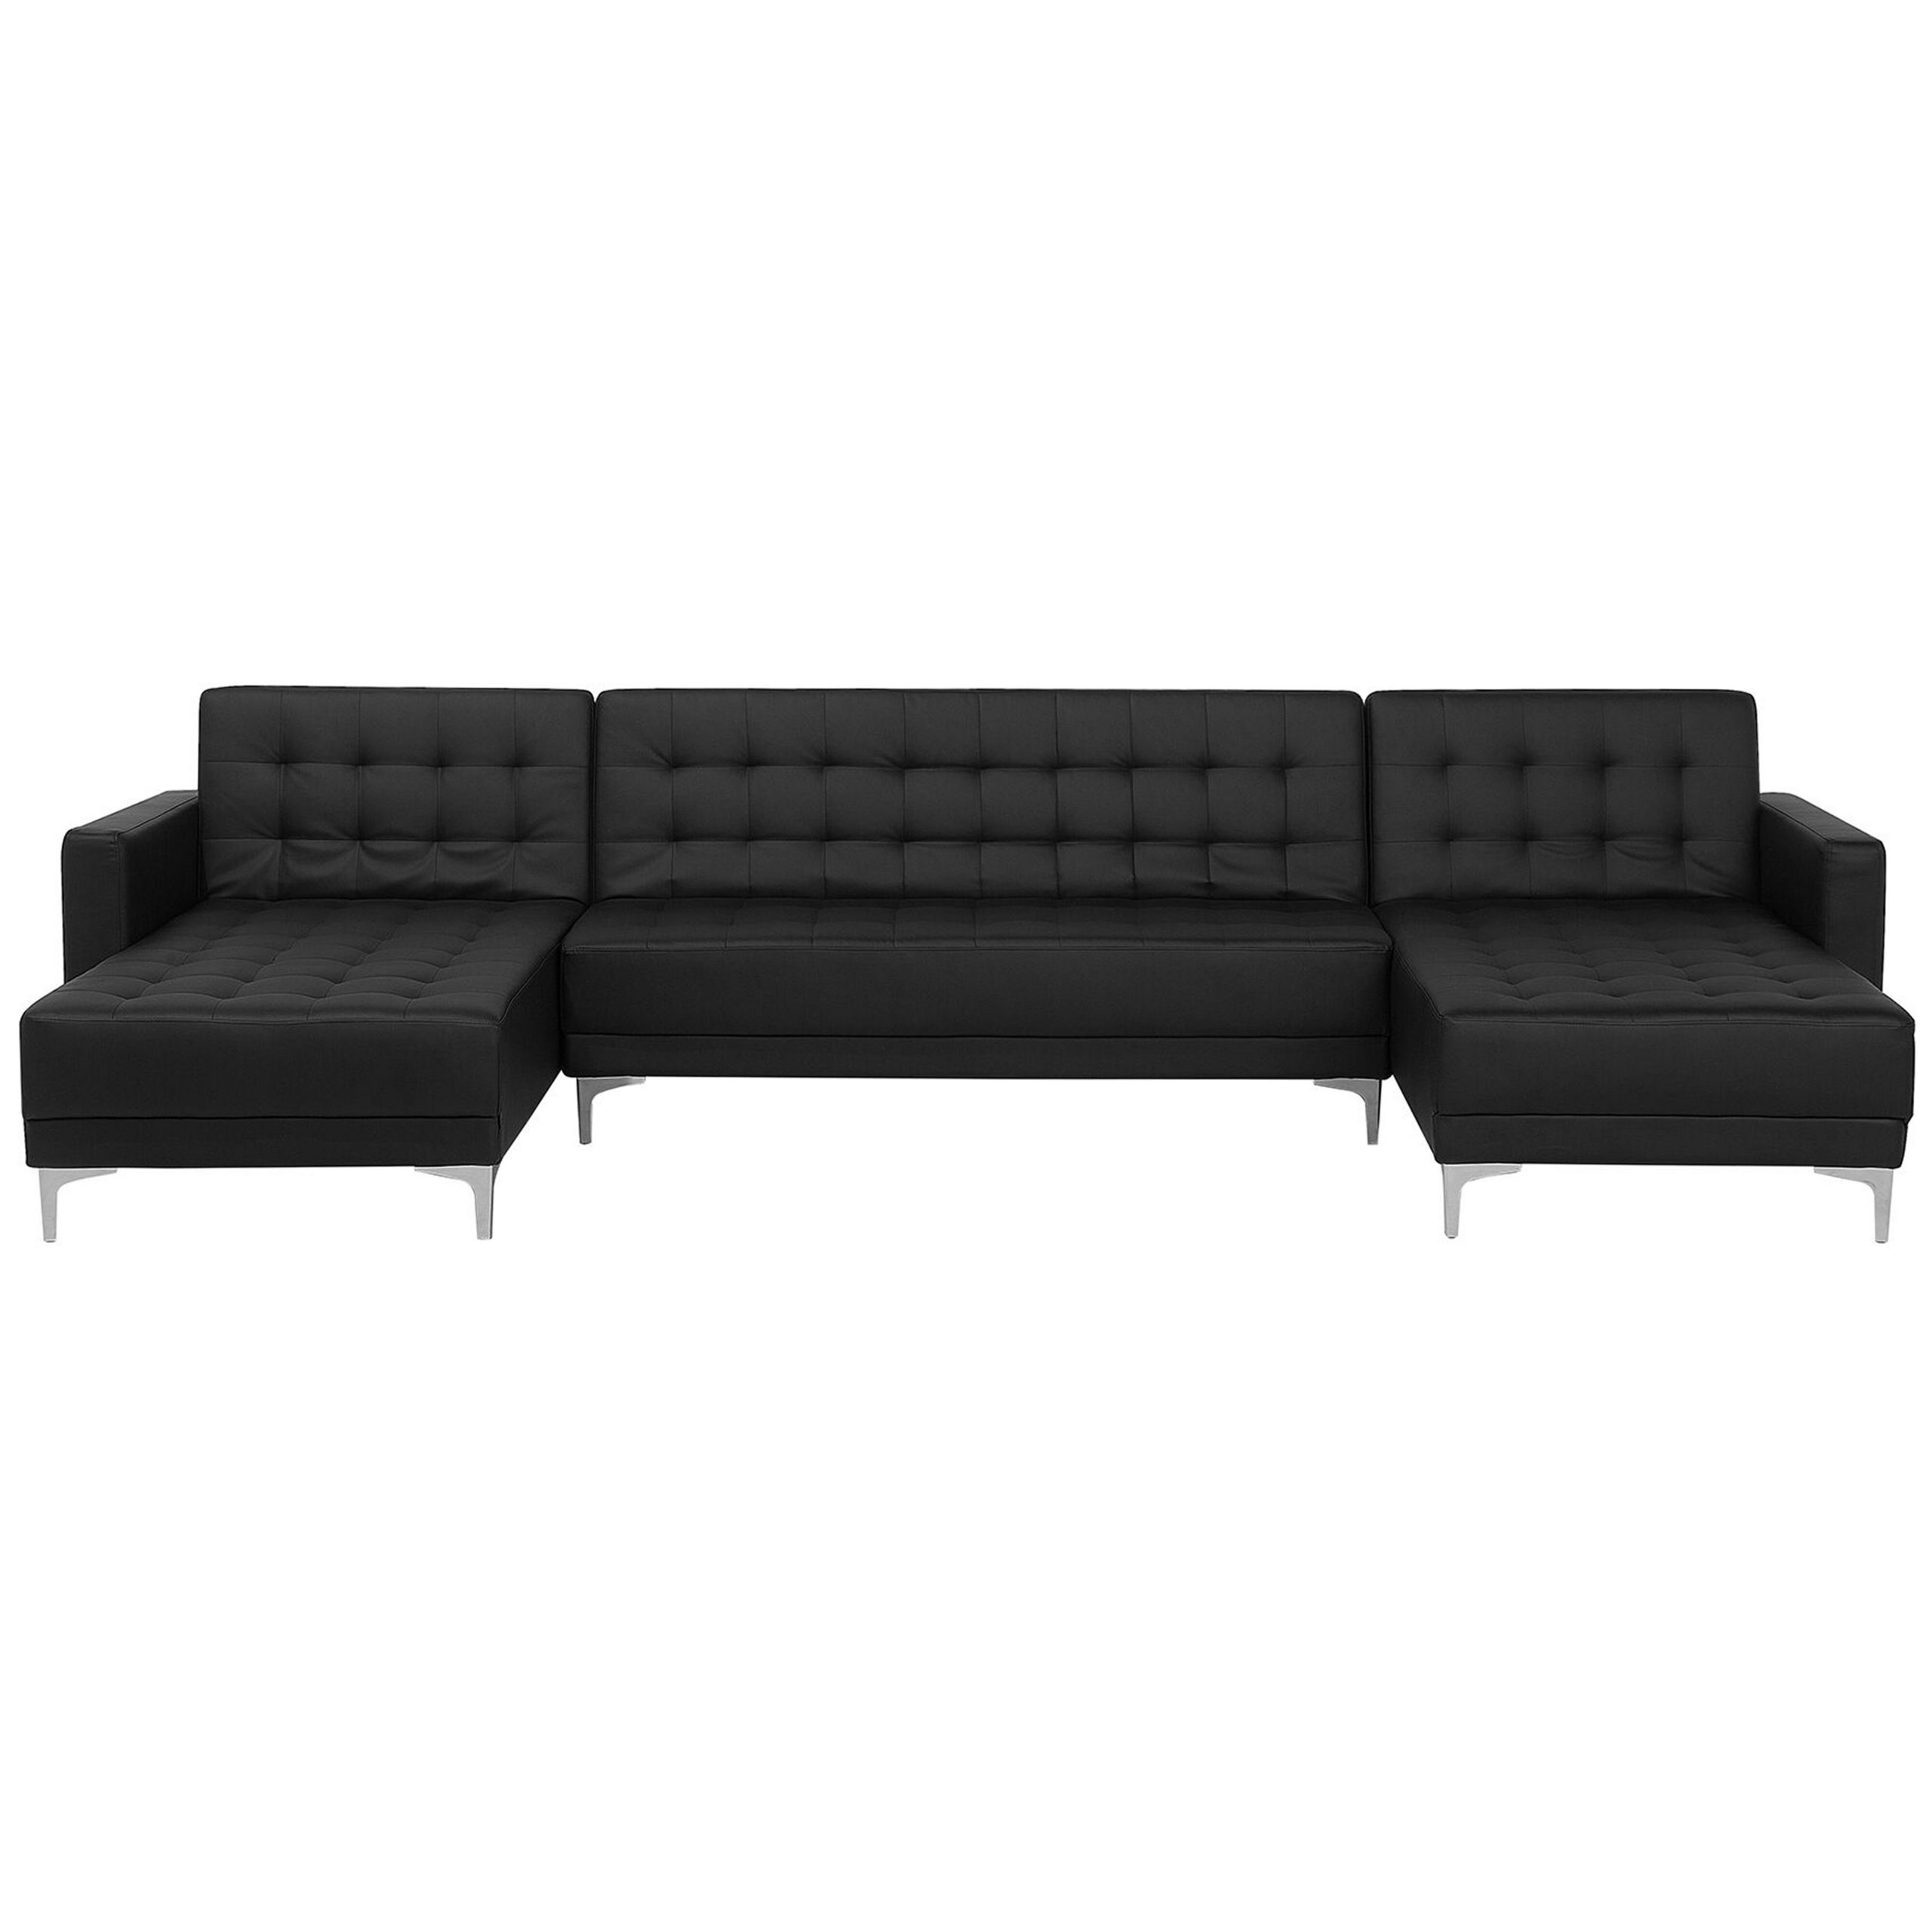 Beliani Corner Sofa Bed Black Faux Leather Tufted Modern U-Shaped Modular 5 Seater with Chaise Longues